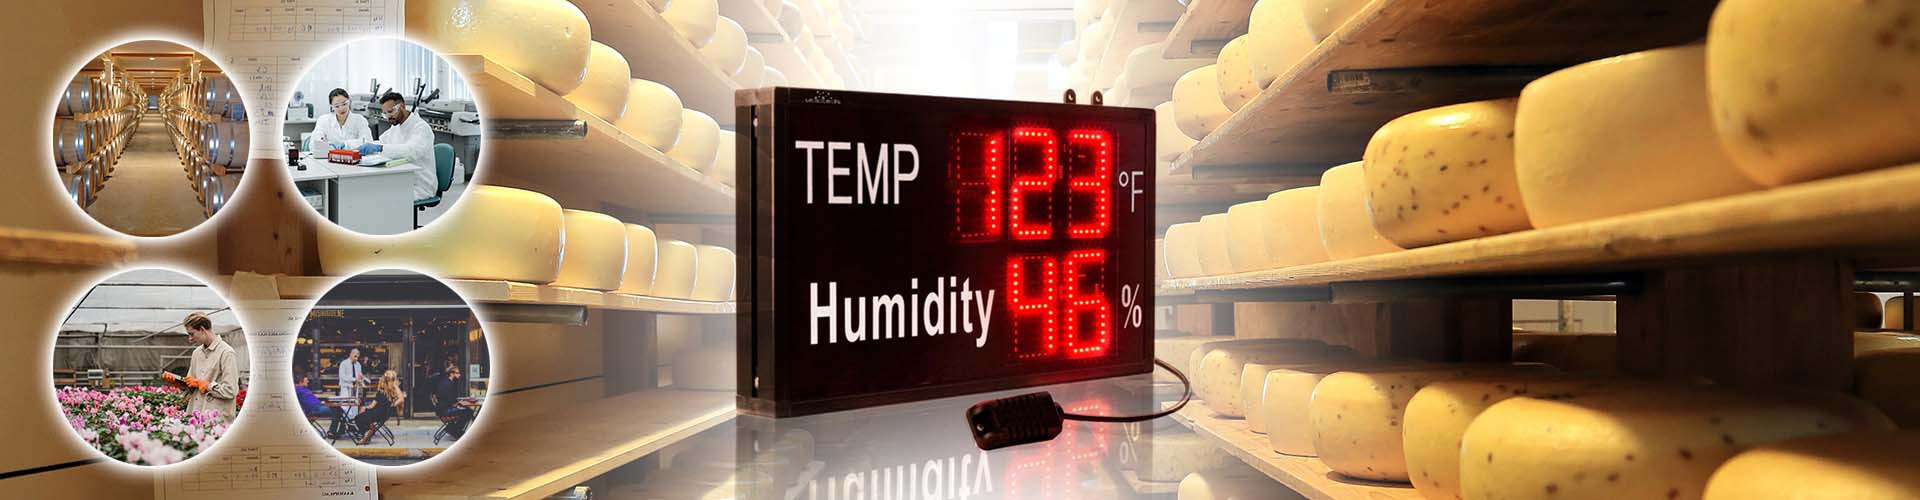 Digital Thermometer and Humidity Monitor